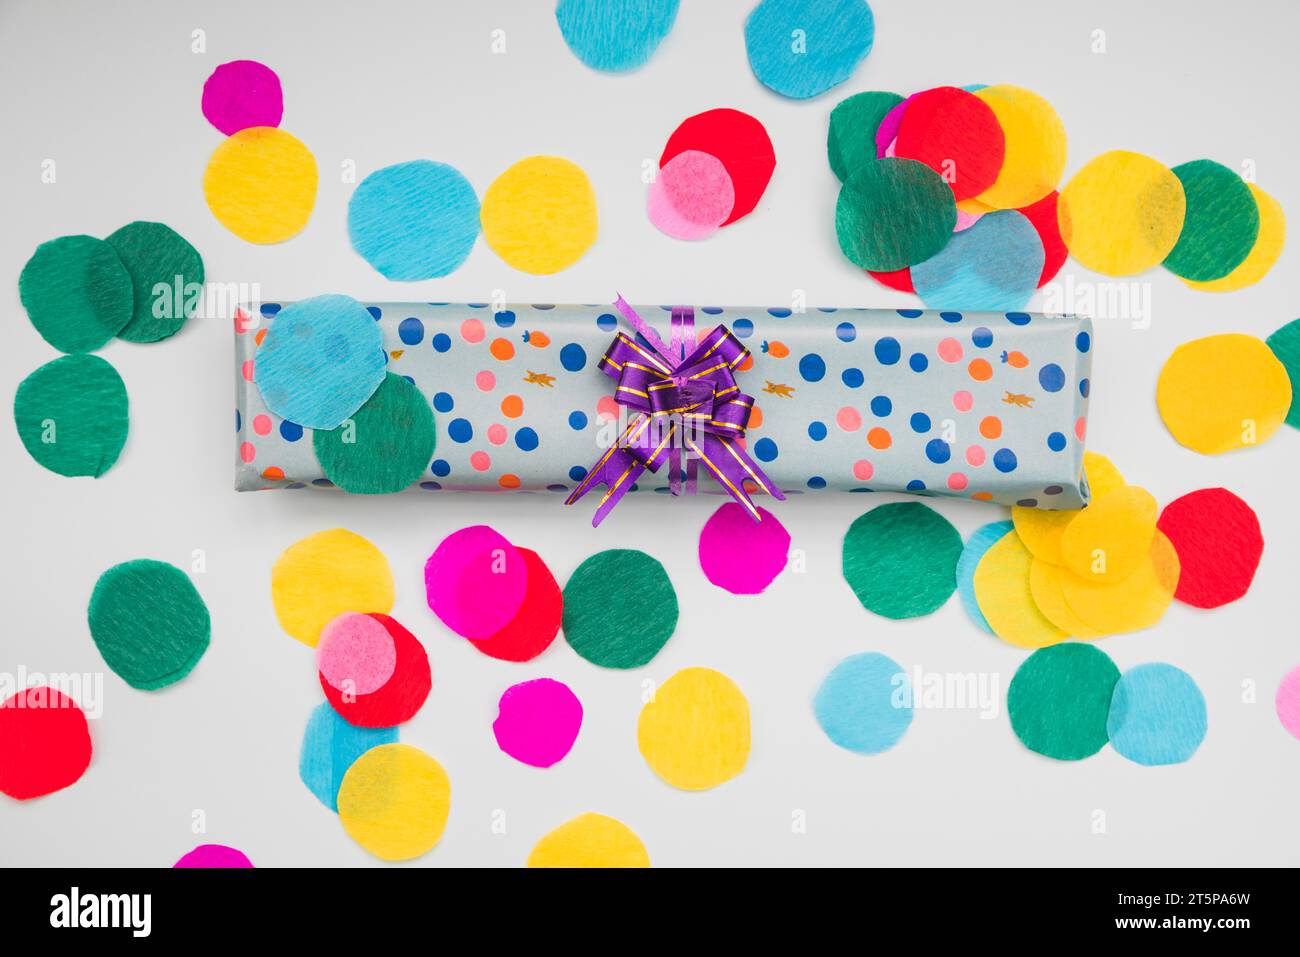 Wrapped polka dot gift box with circular cut out colored paper white background Stock Photo